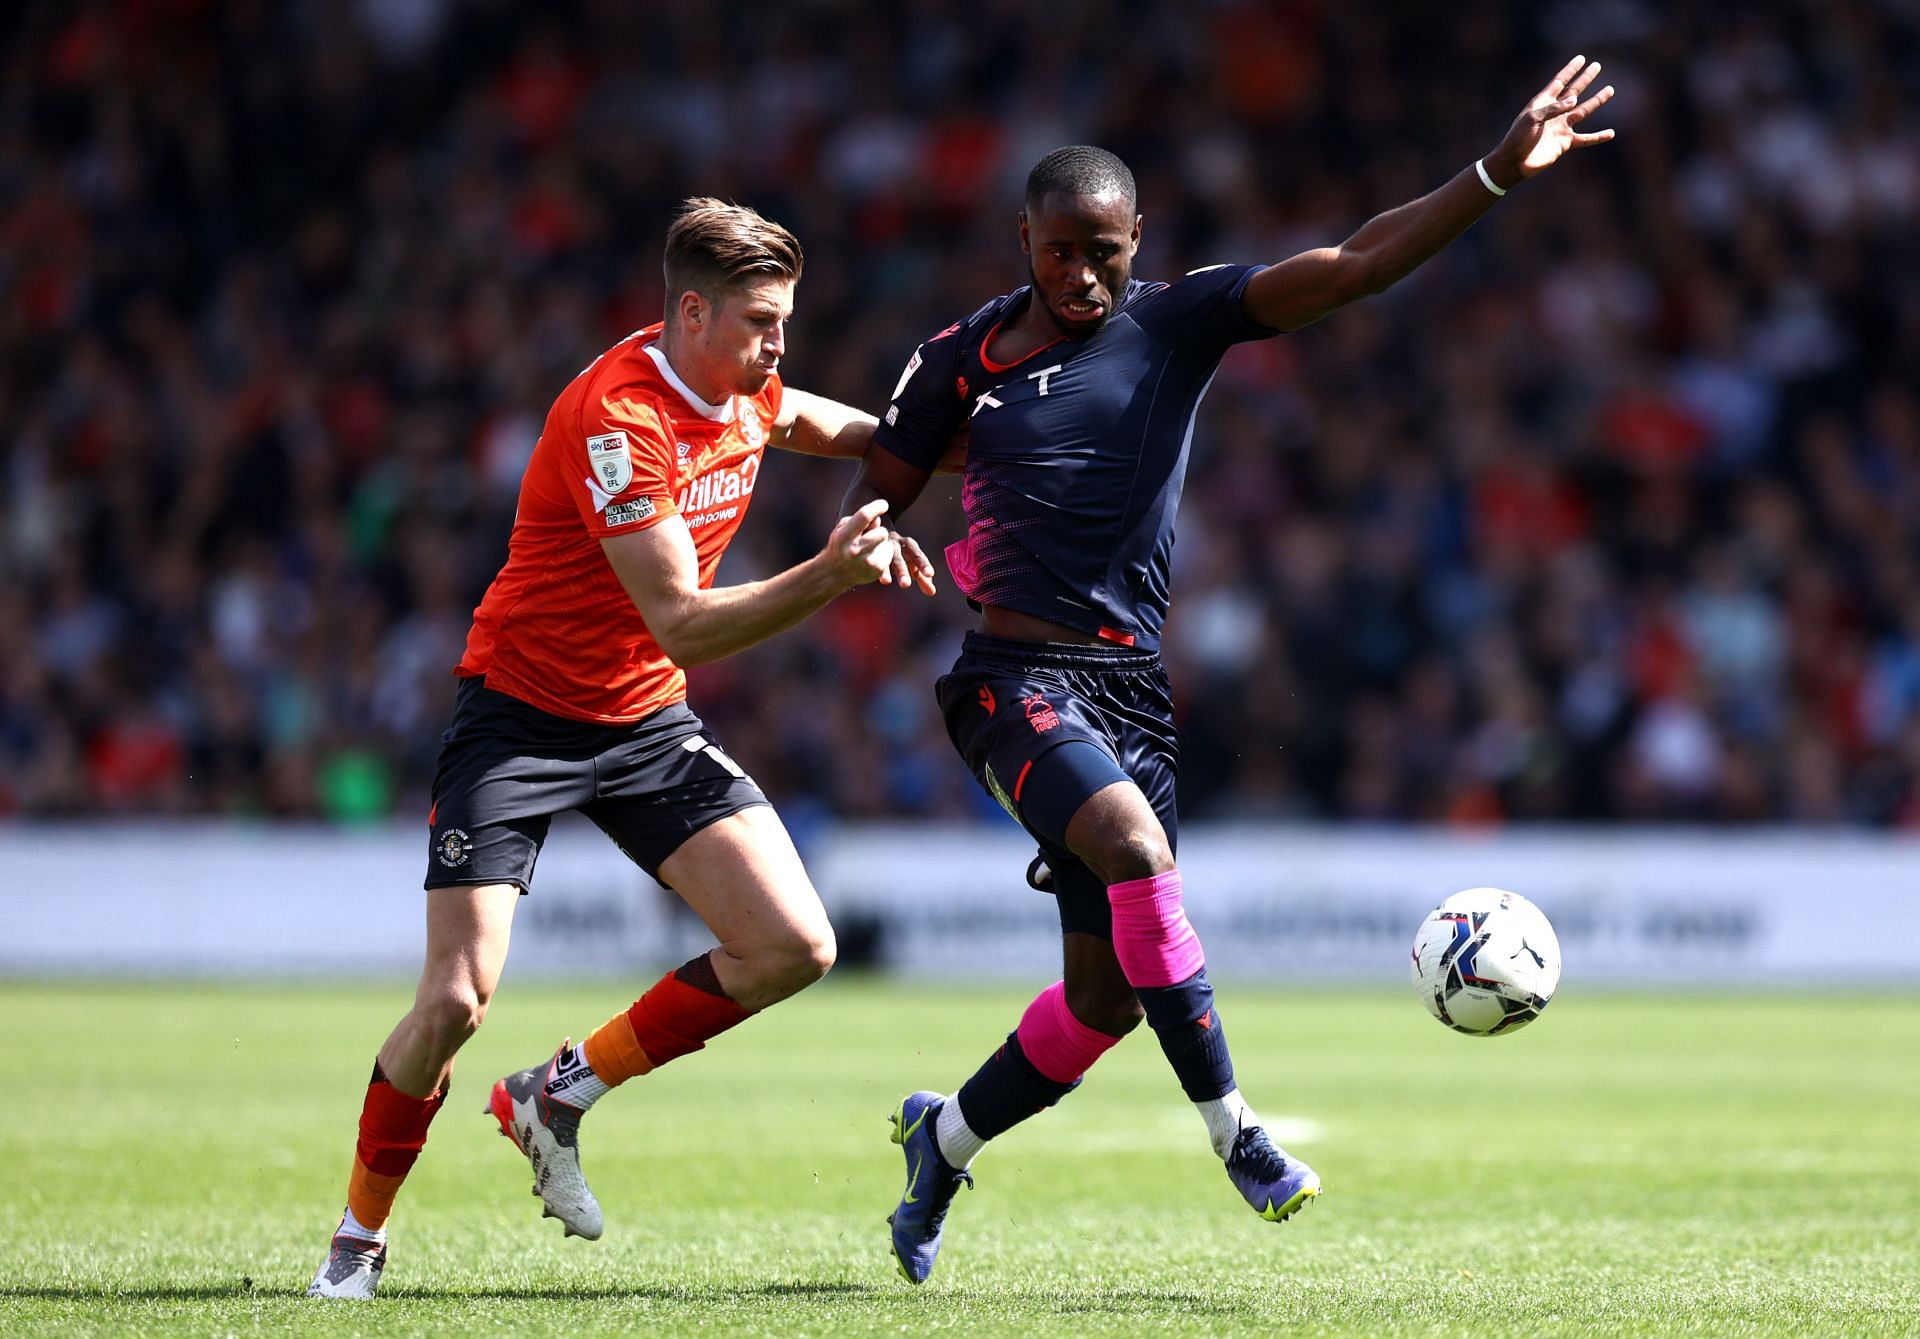 Luton Town will face a tough tie against Blackpool.